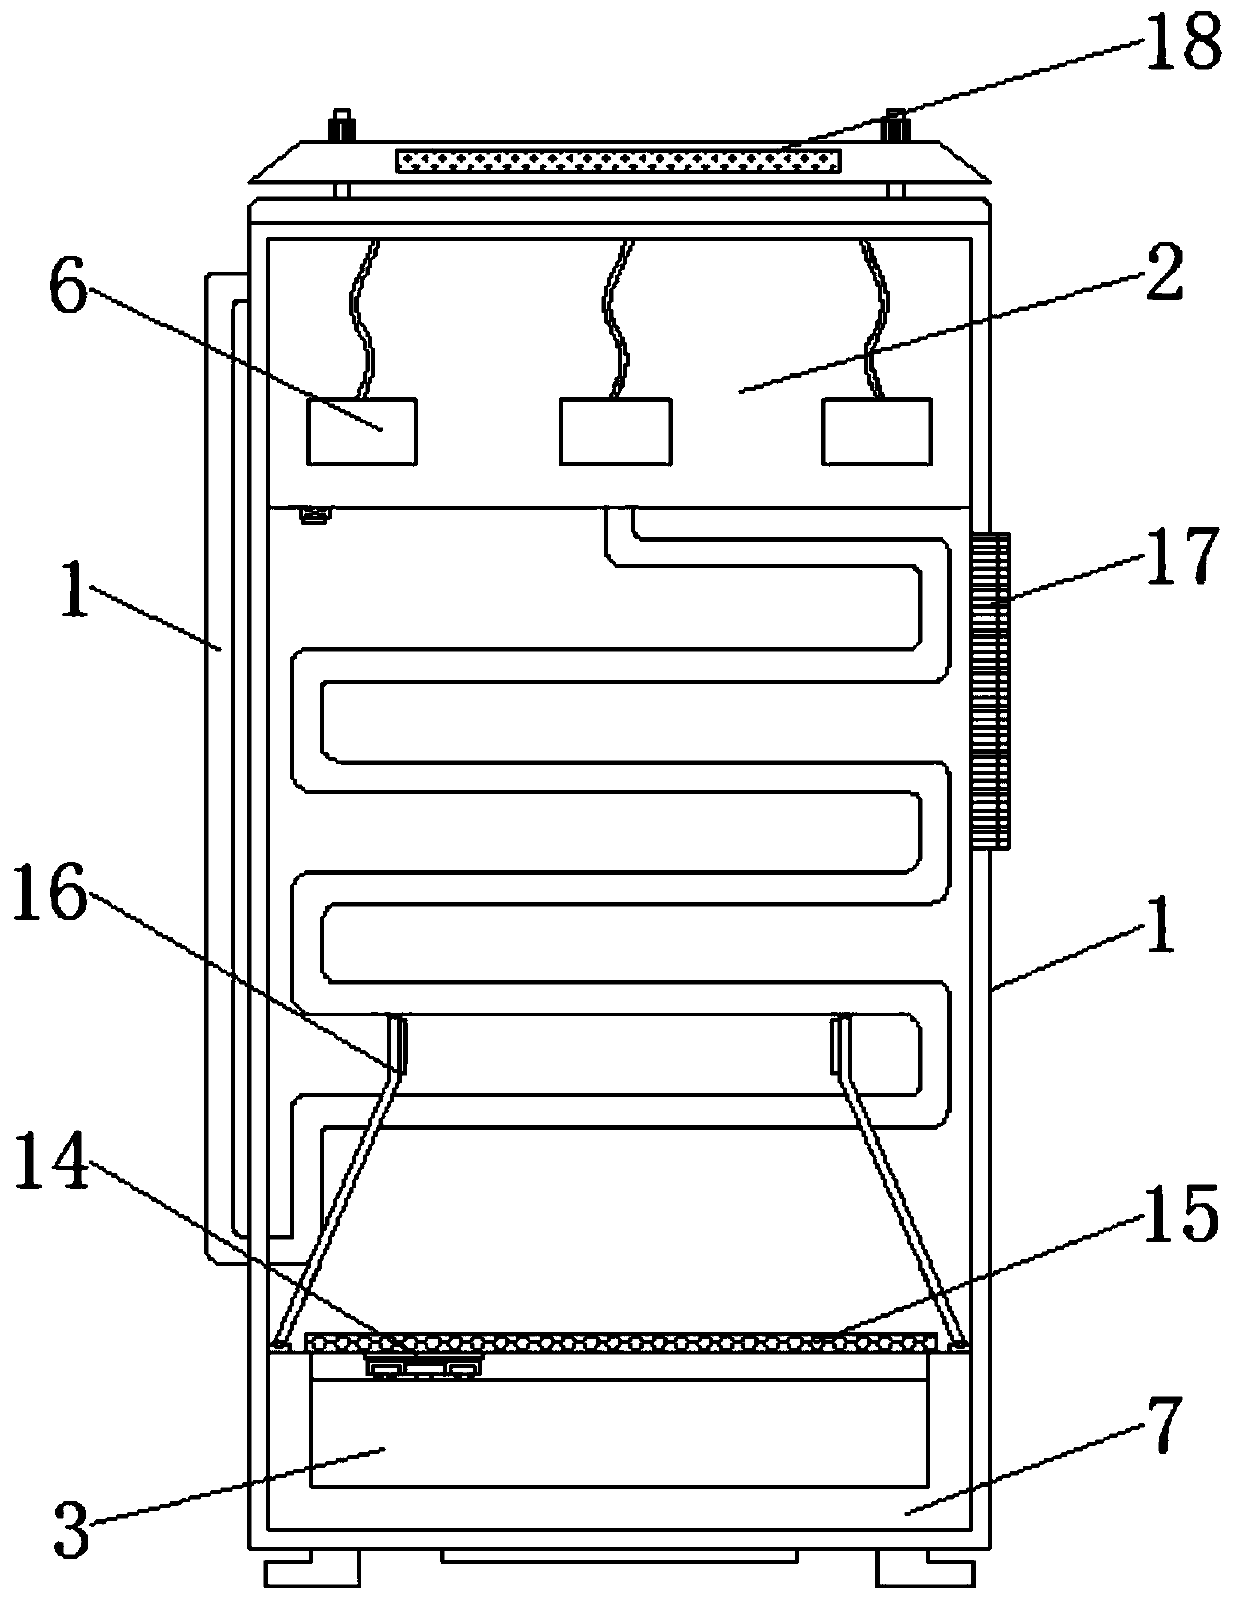 Power equipment cooling device